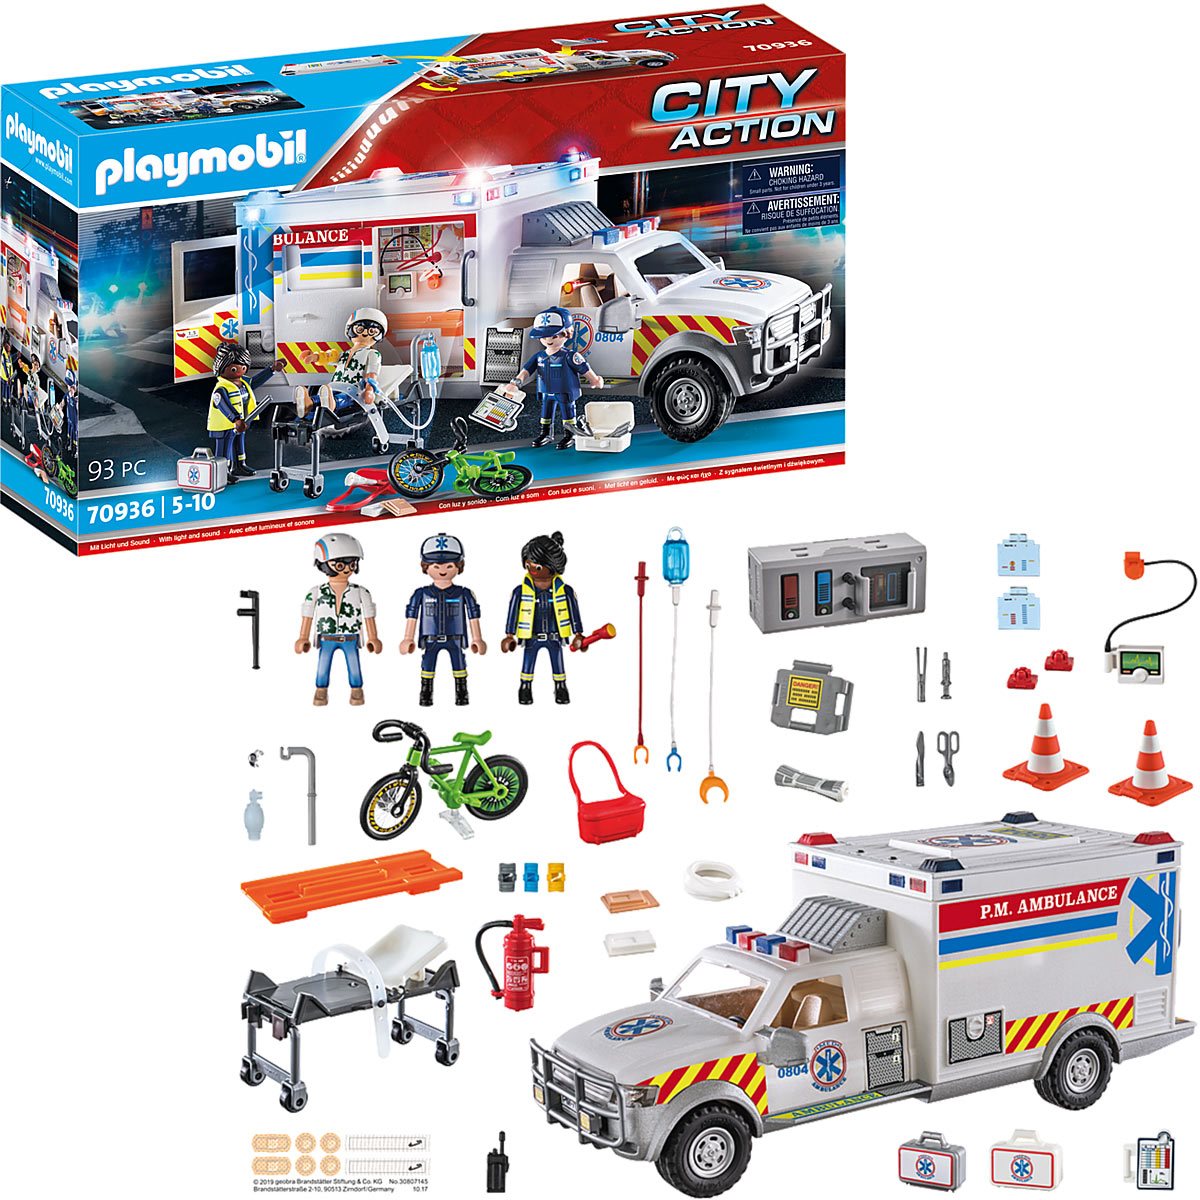 Playmobil Rescue Vehicles: Ambulance with Lights and Sound